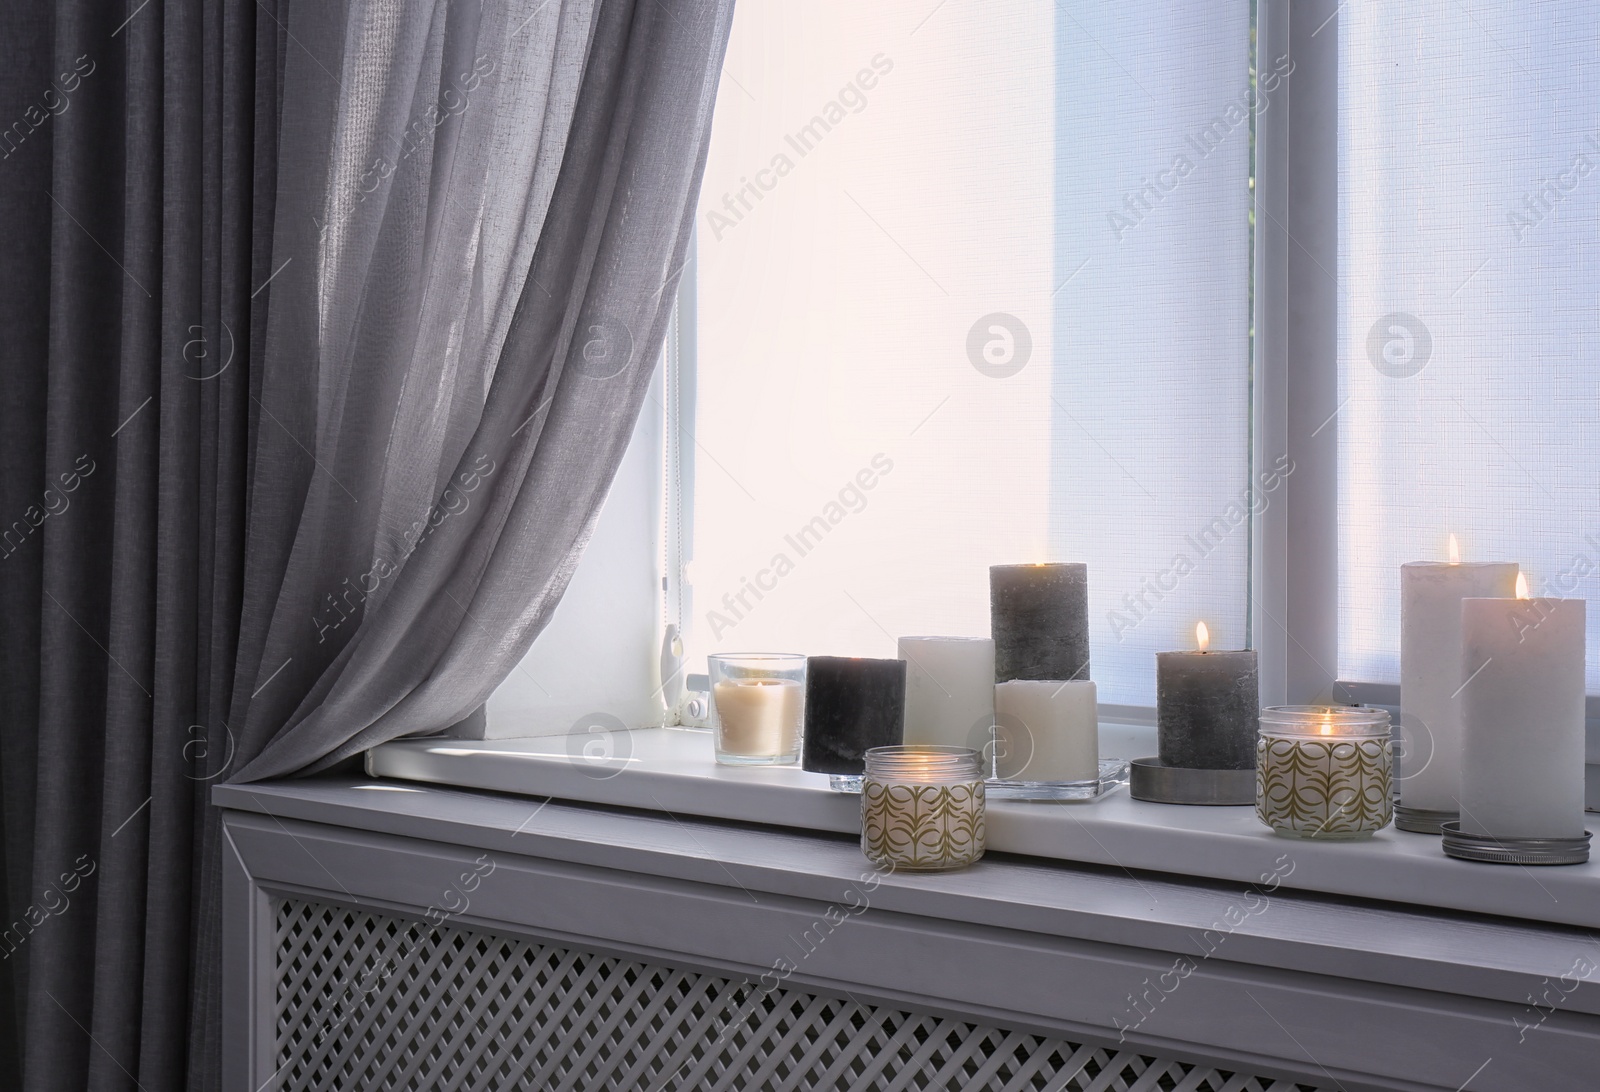 Photo of Burning candles on window sill in room